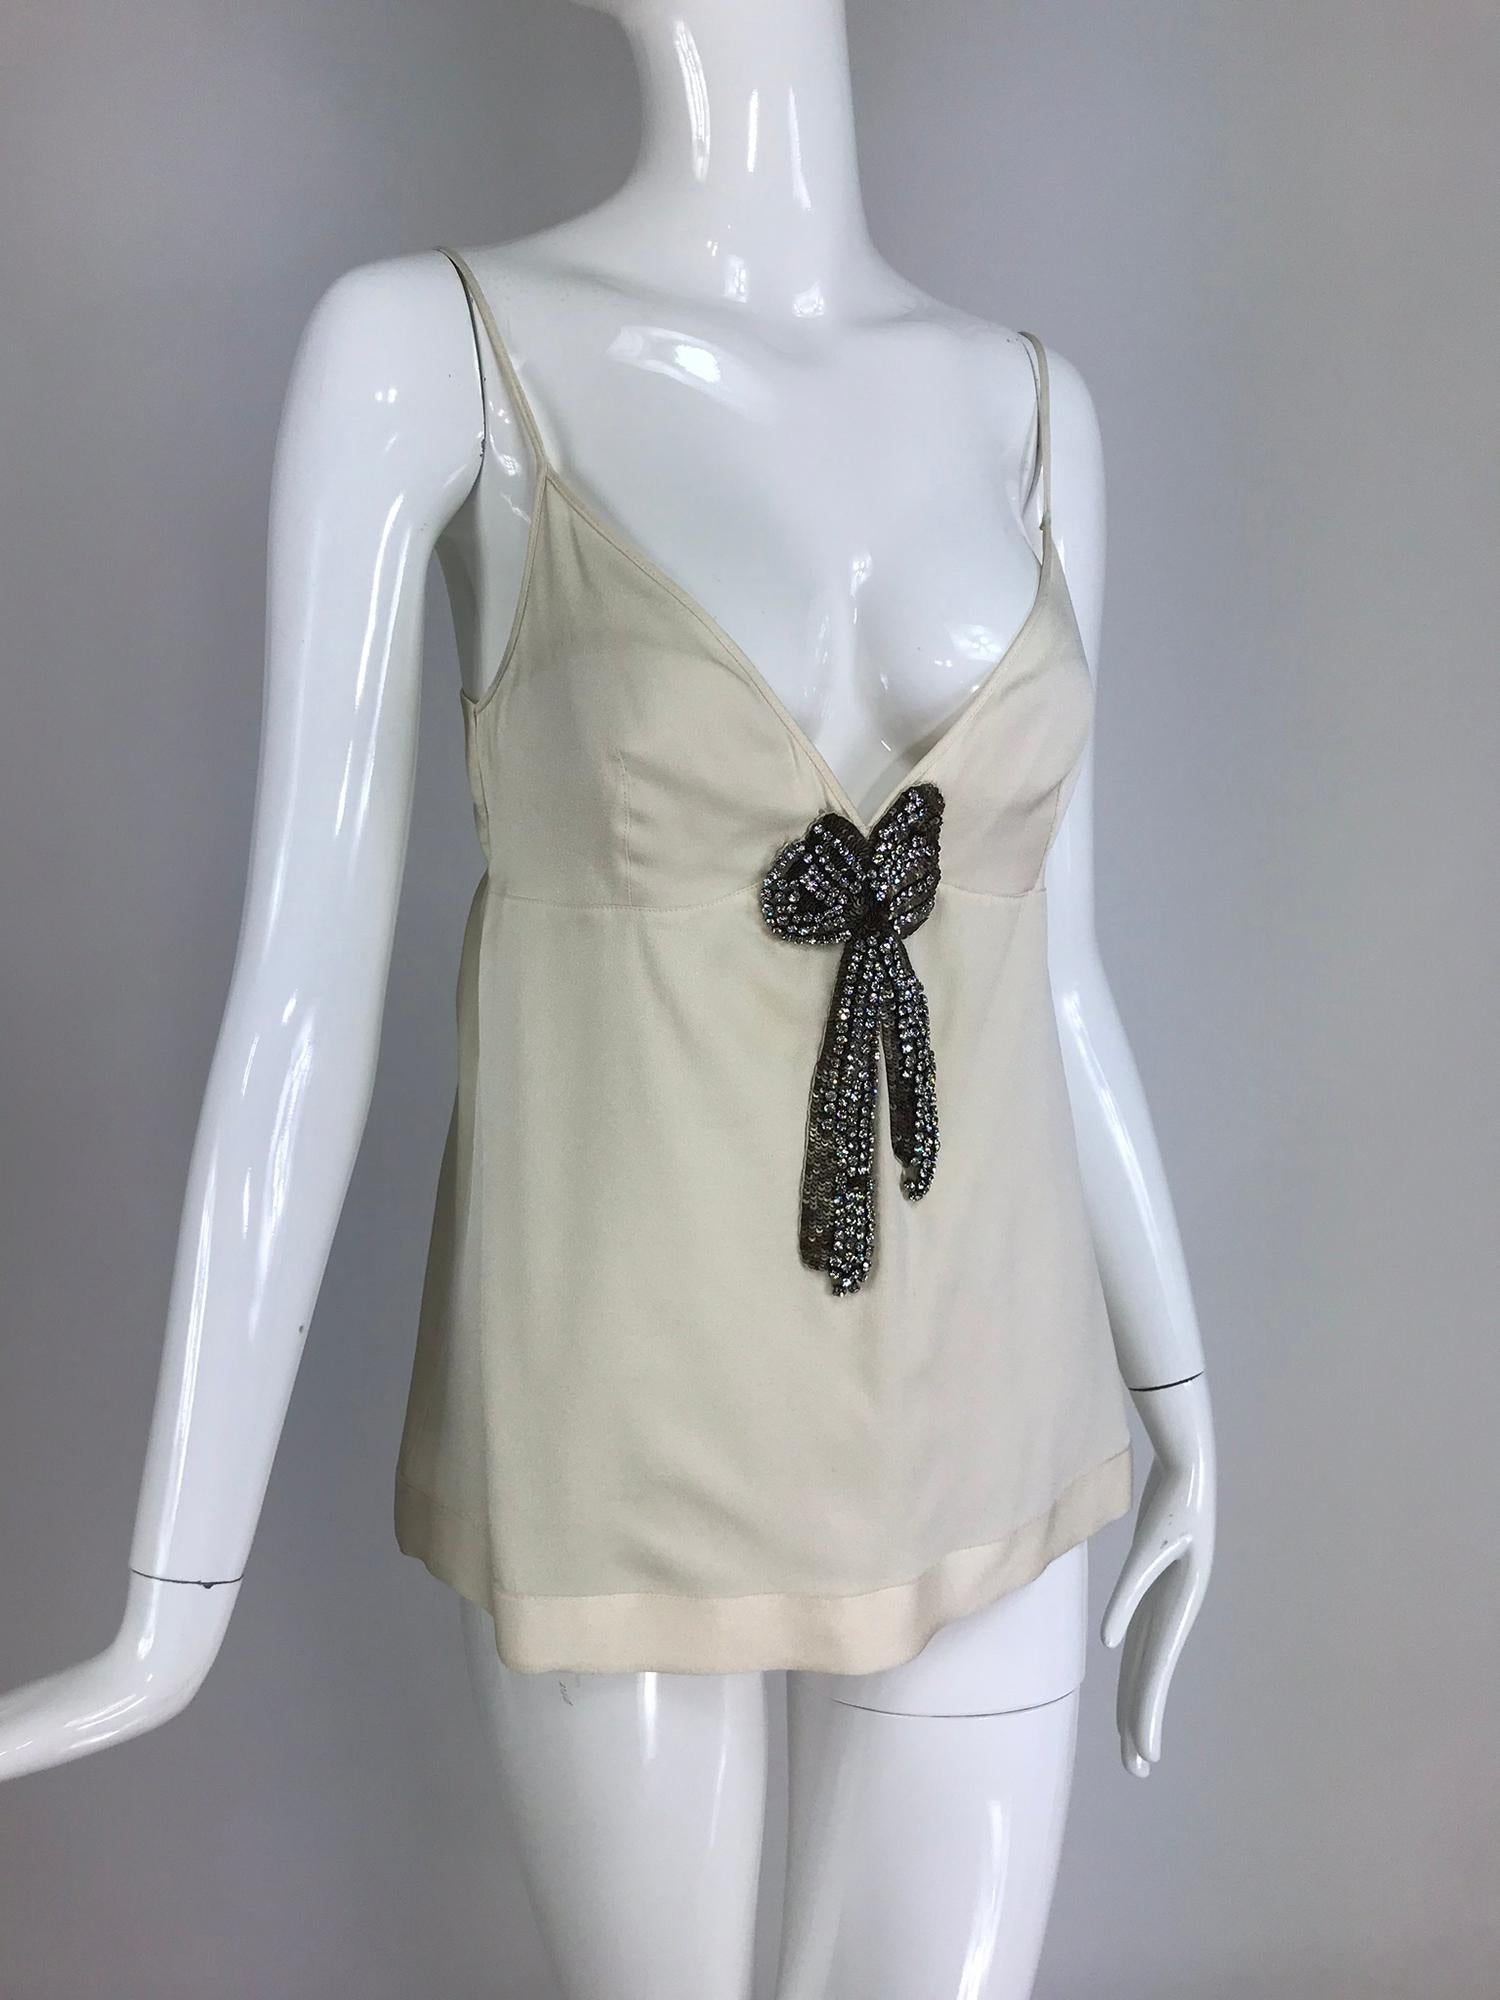 Alexander McQueen Ivory Silk with Rhinestone Bow Camisole Top. Silk top in ivory with a  plunge V neckline, seamed darts under bust and horizontal seam under bust. A large applique bow of prong set rhinestones and gold sequins is the centerpiece of